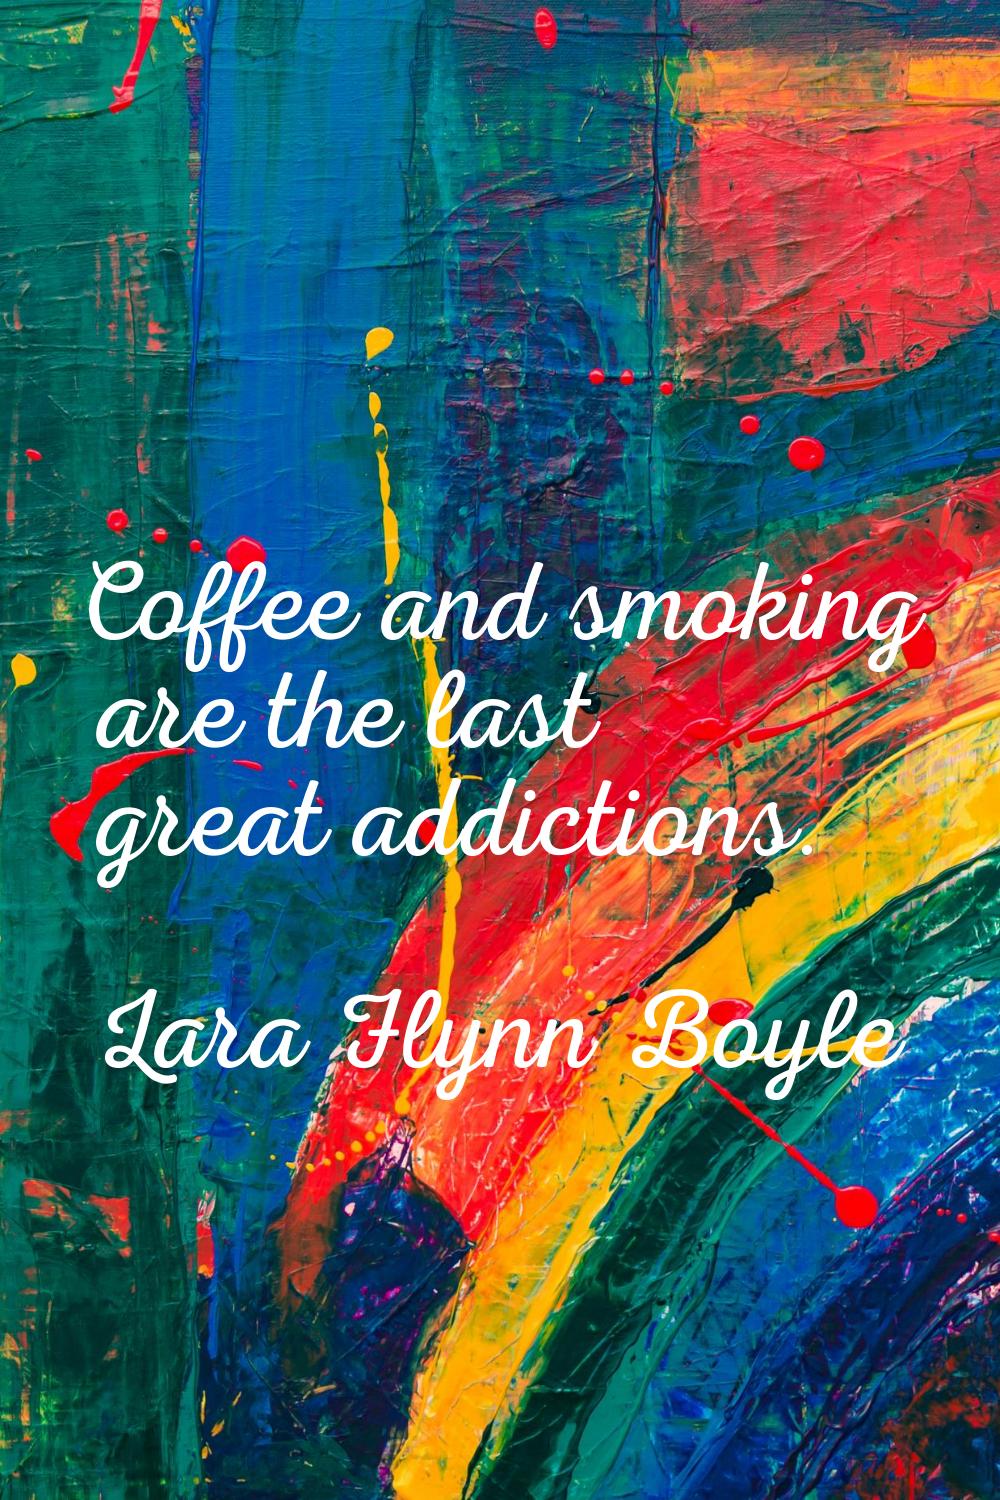 Coffee and smoking are the last great addictions.